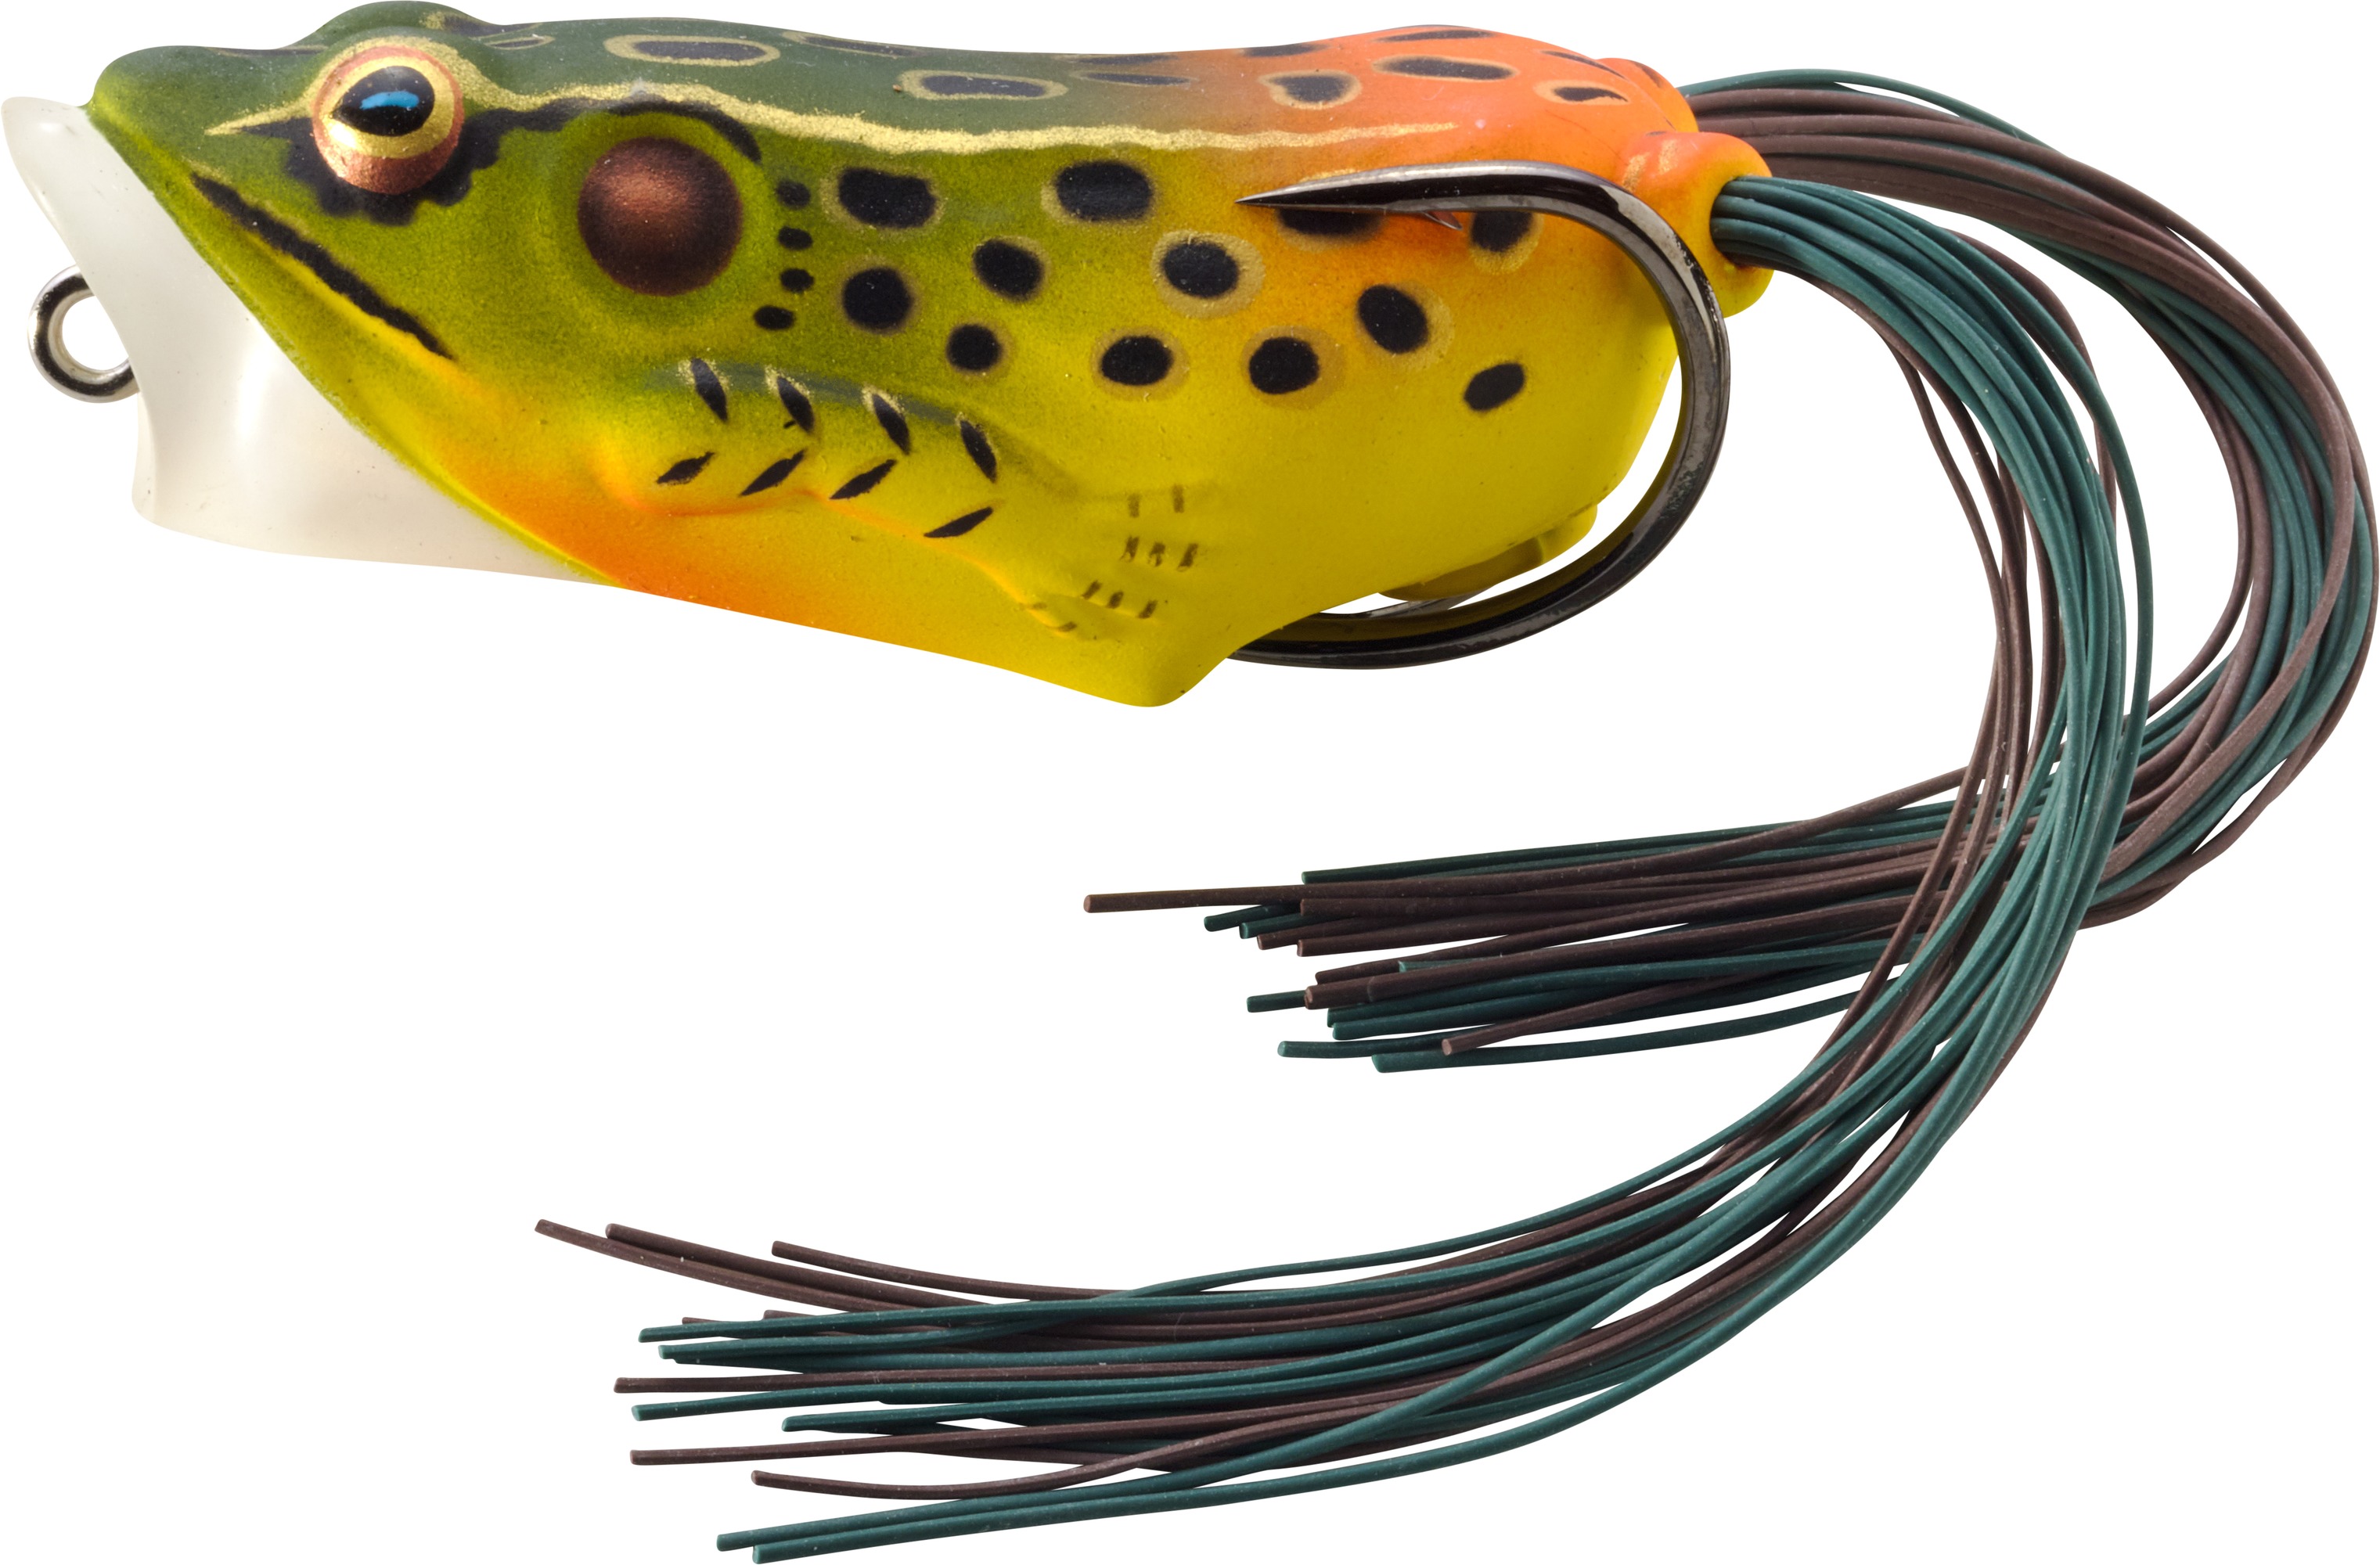 LiveTarget FHP65T519 Frog Hollow Body Popper Topwater Lure, 2 1/2